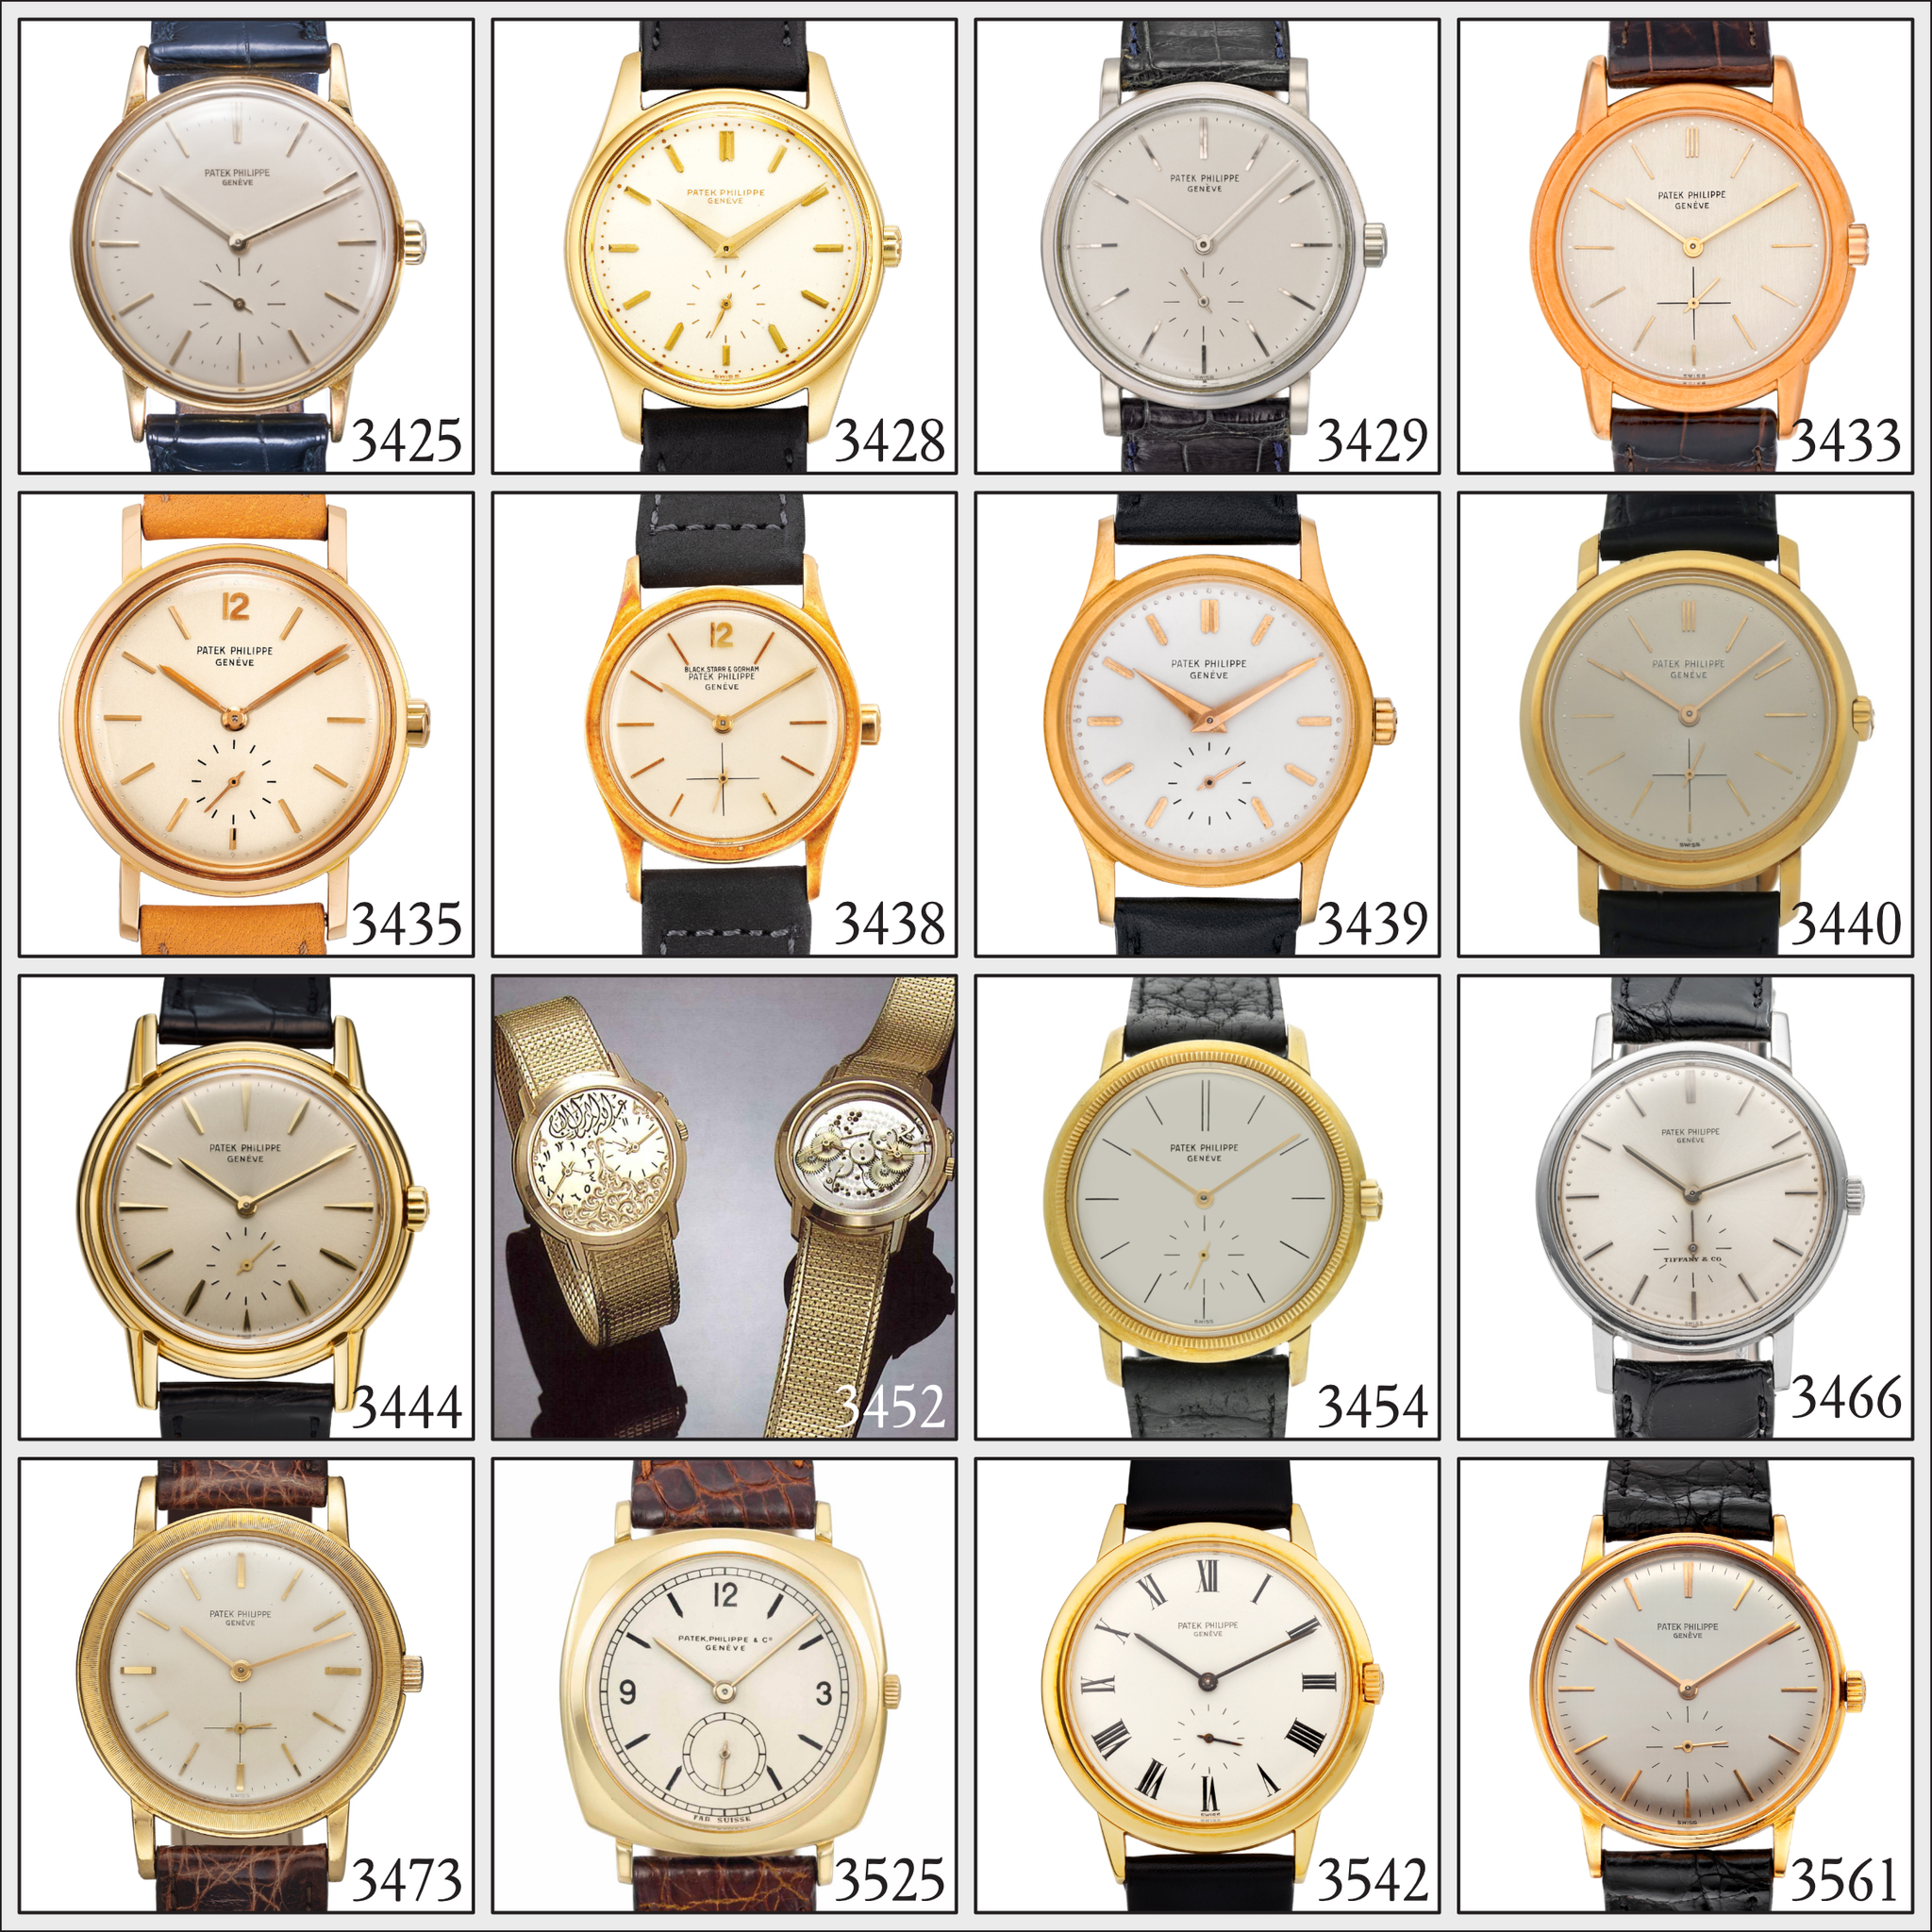 Overview over 16 vintage Patek Philippe time-only references with the automatic Cal. 27-460